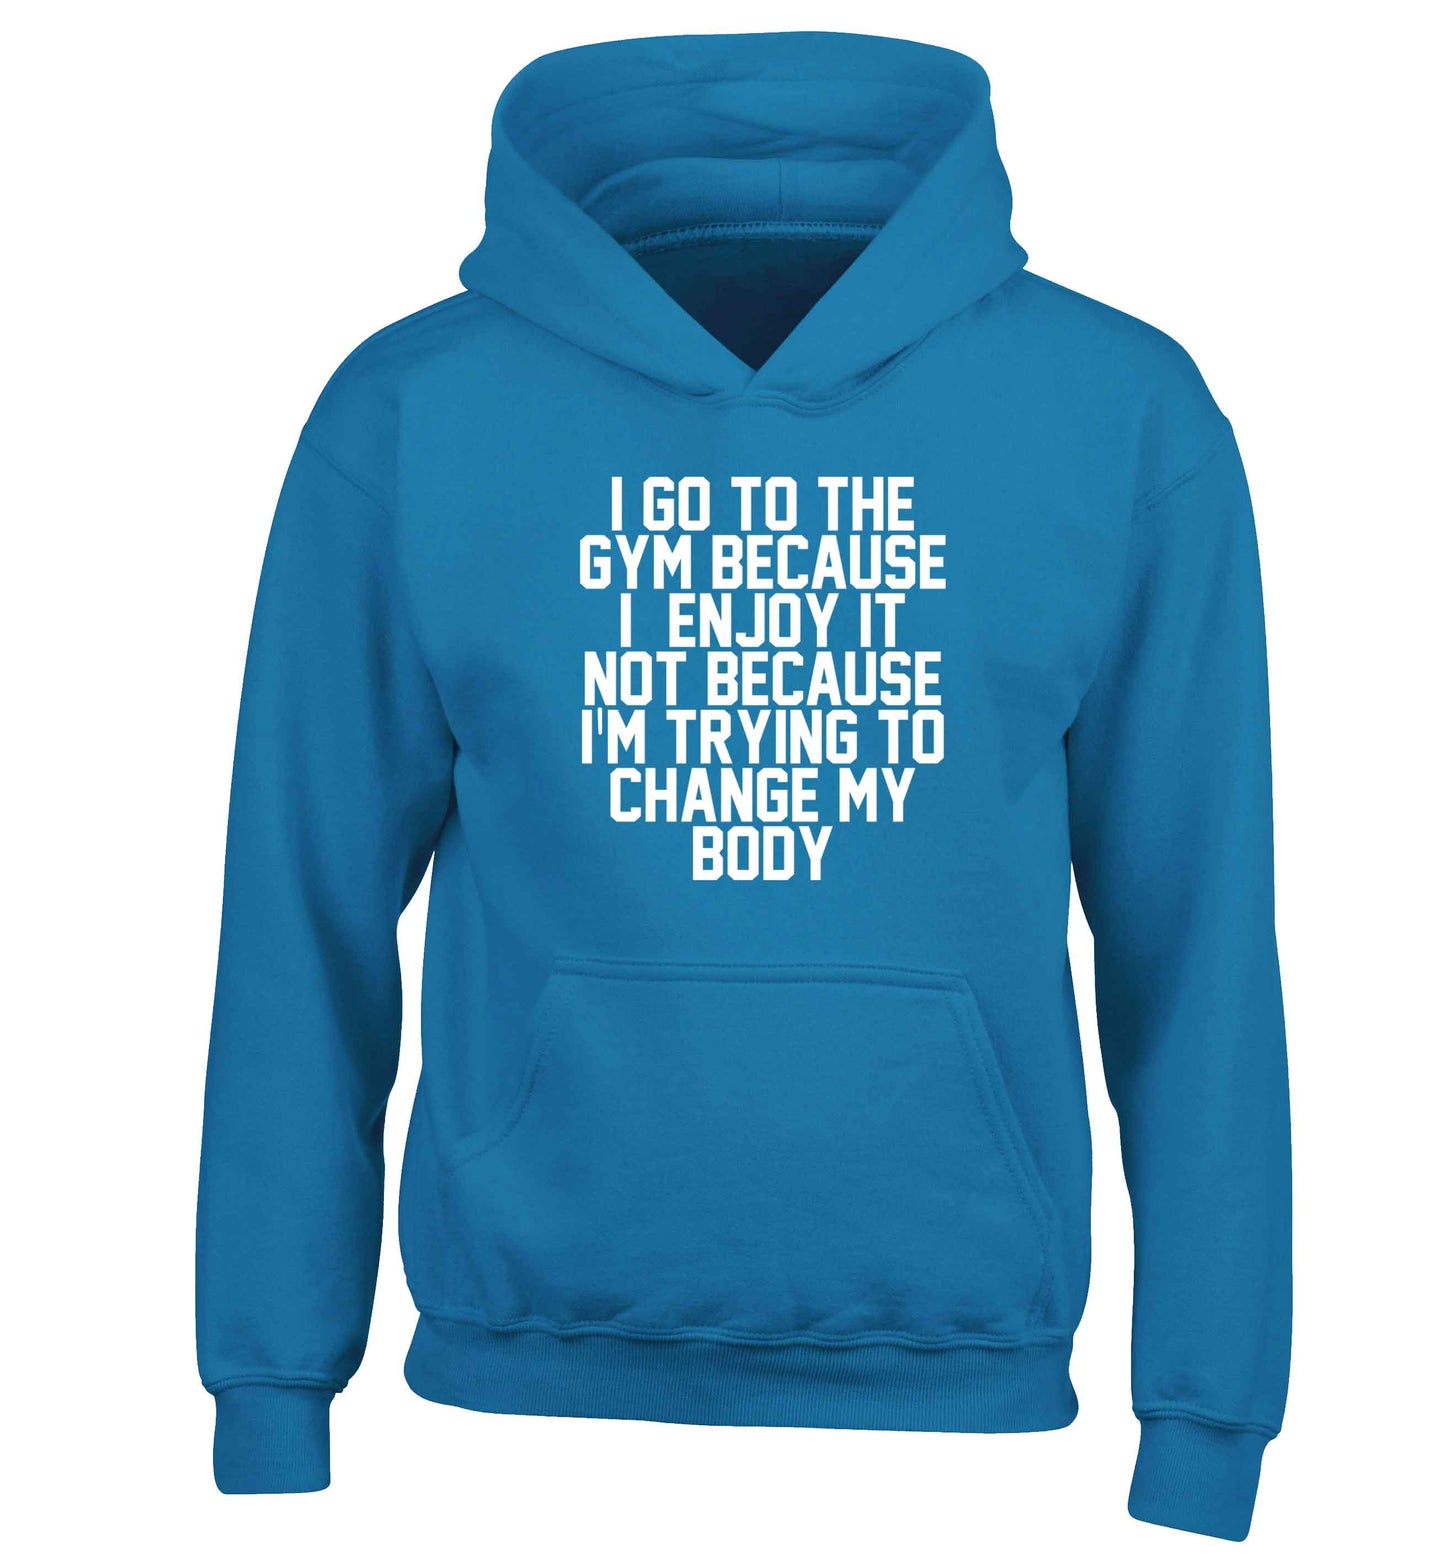 I go to the gym because I enjoy it not because I'm trying to change my body children's blue hoodie 12-13 Years